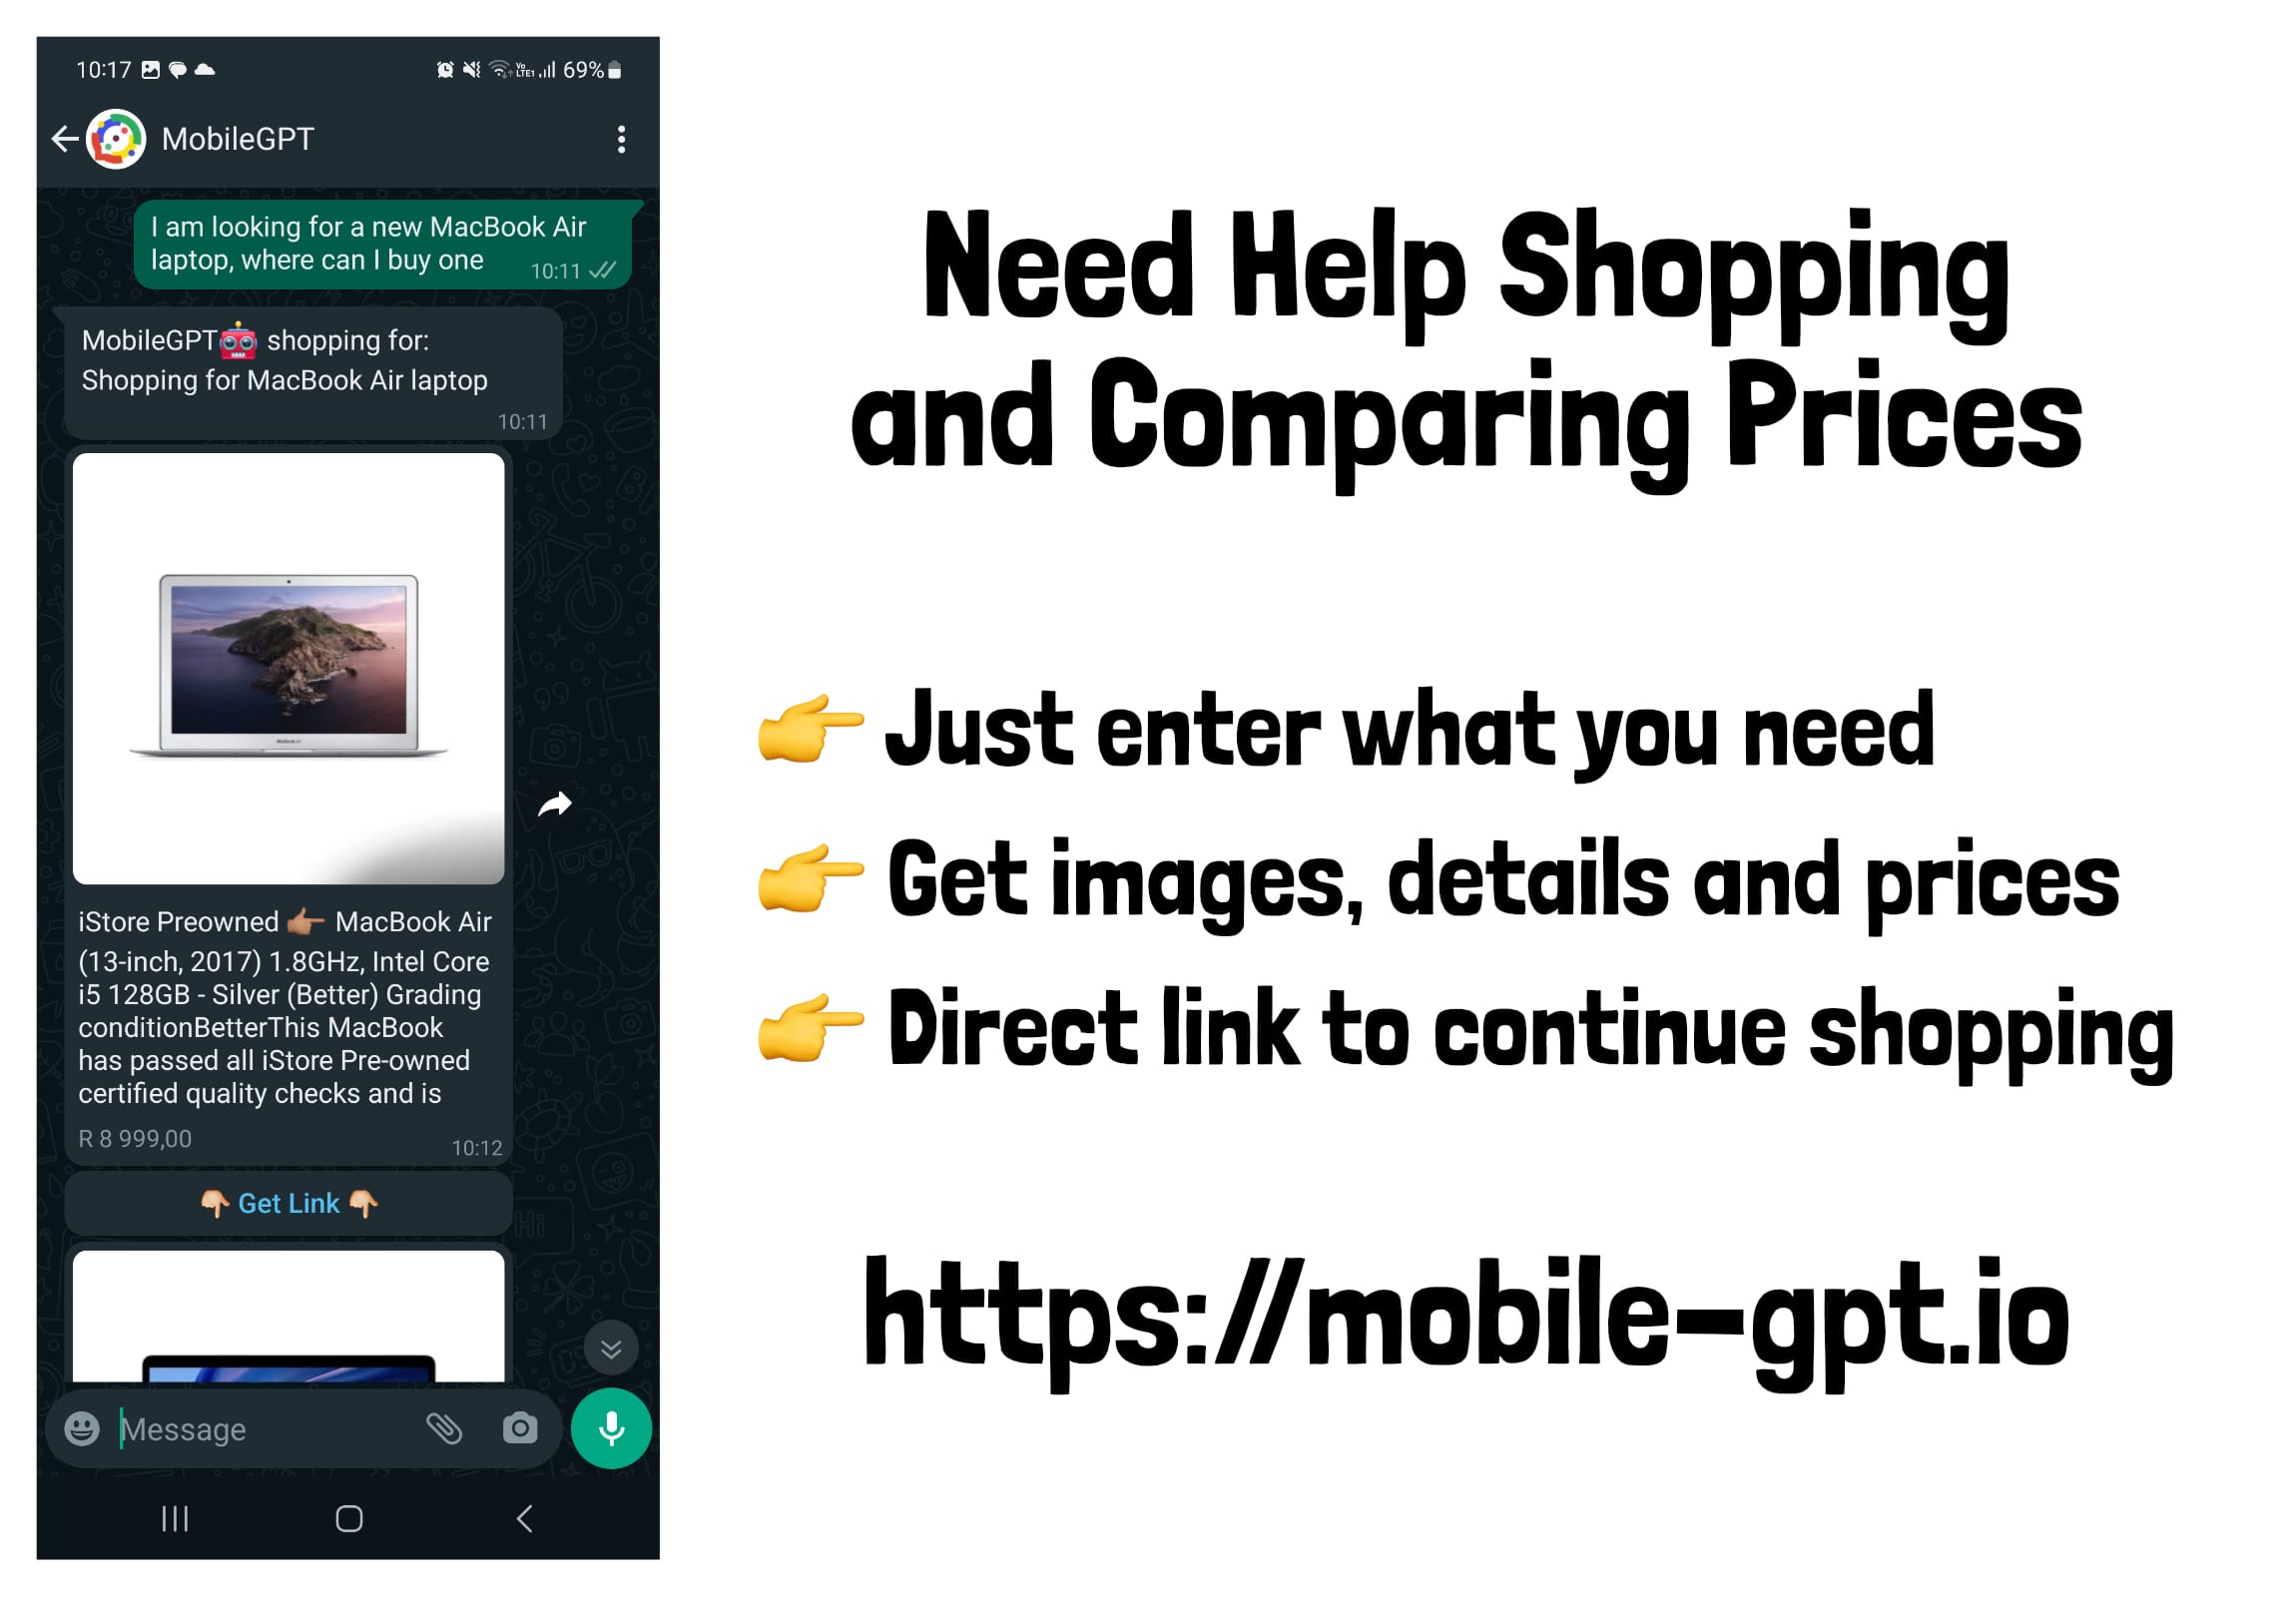 WhatsApp Shopping Assistant